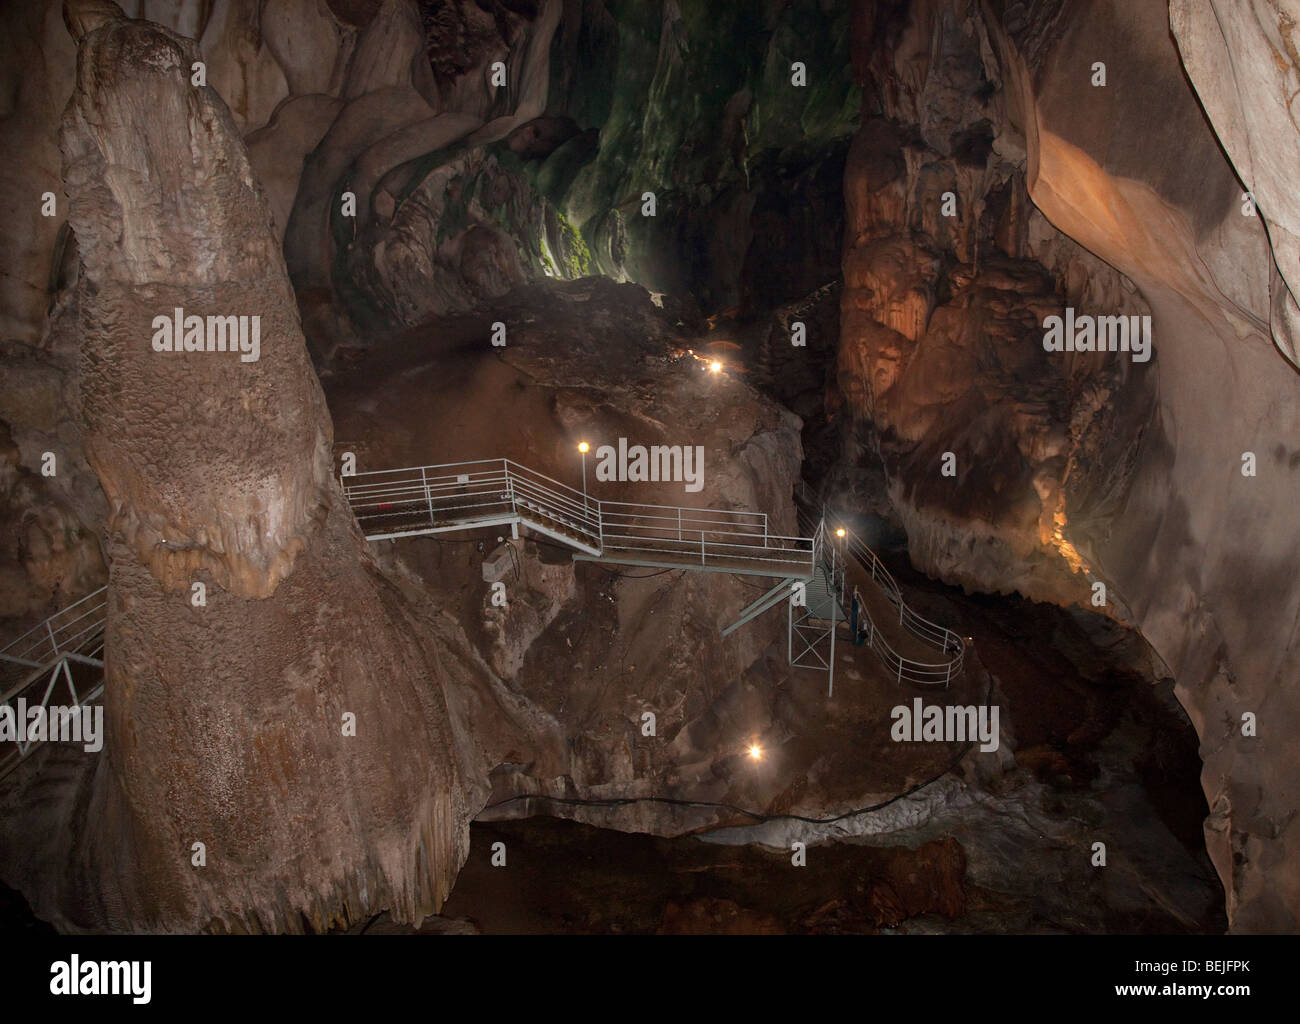 Gua Tempurung cave interior showing large stalacmite and walkways Stock Photo